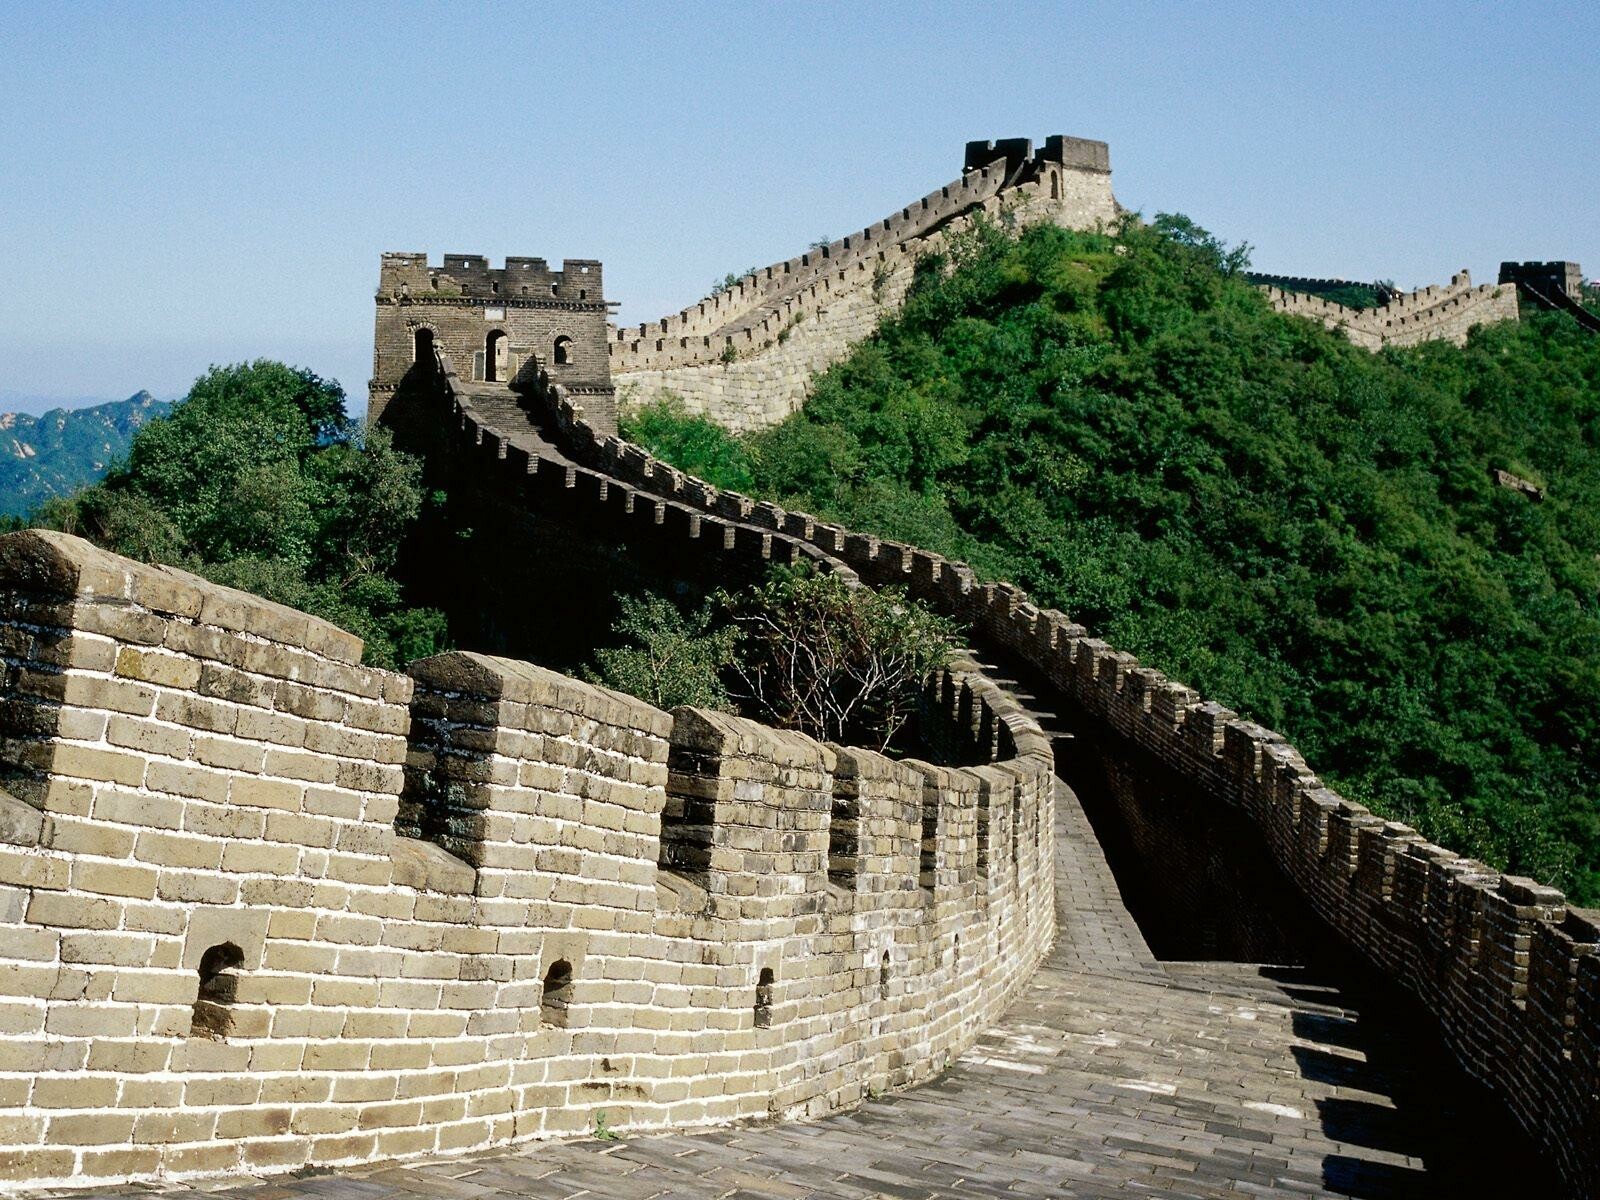 59+ Great Wall of China Wallpapers: HD, 4K, 5K for PC and Mobile | Download  free images for iPhone, Android